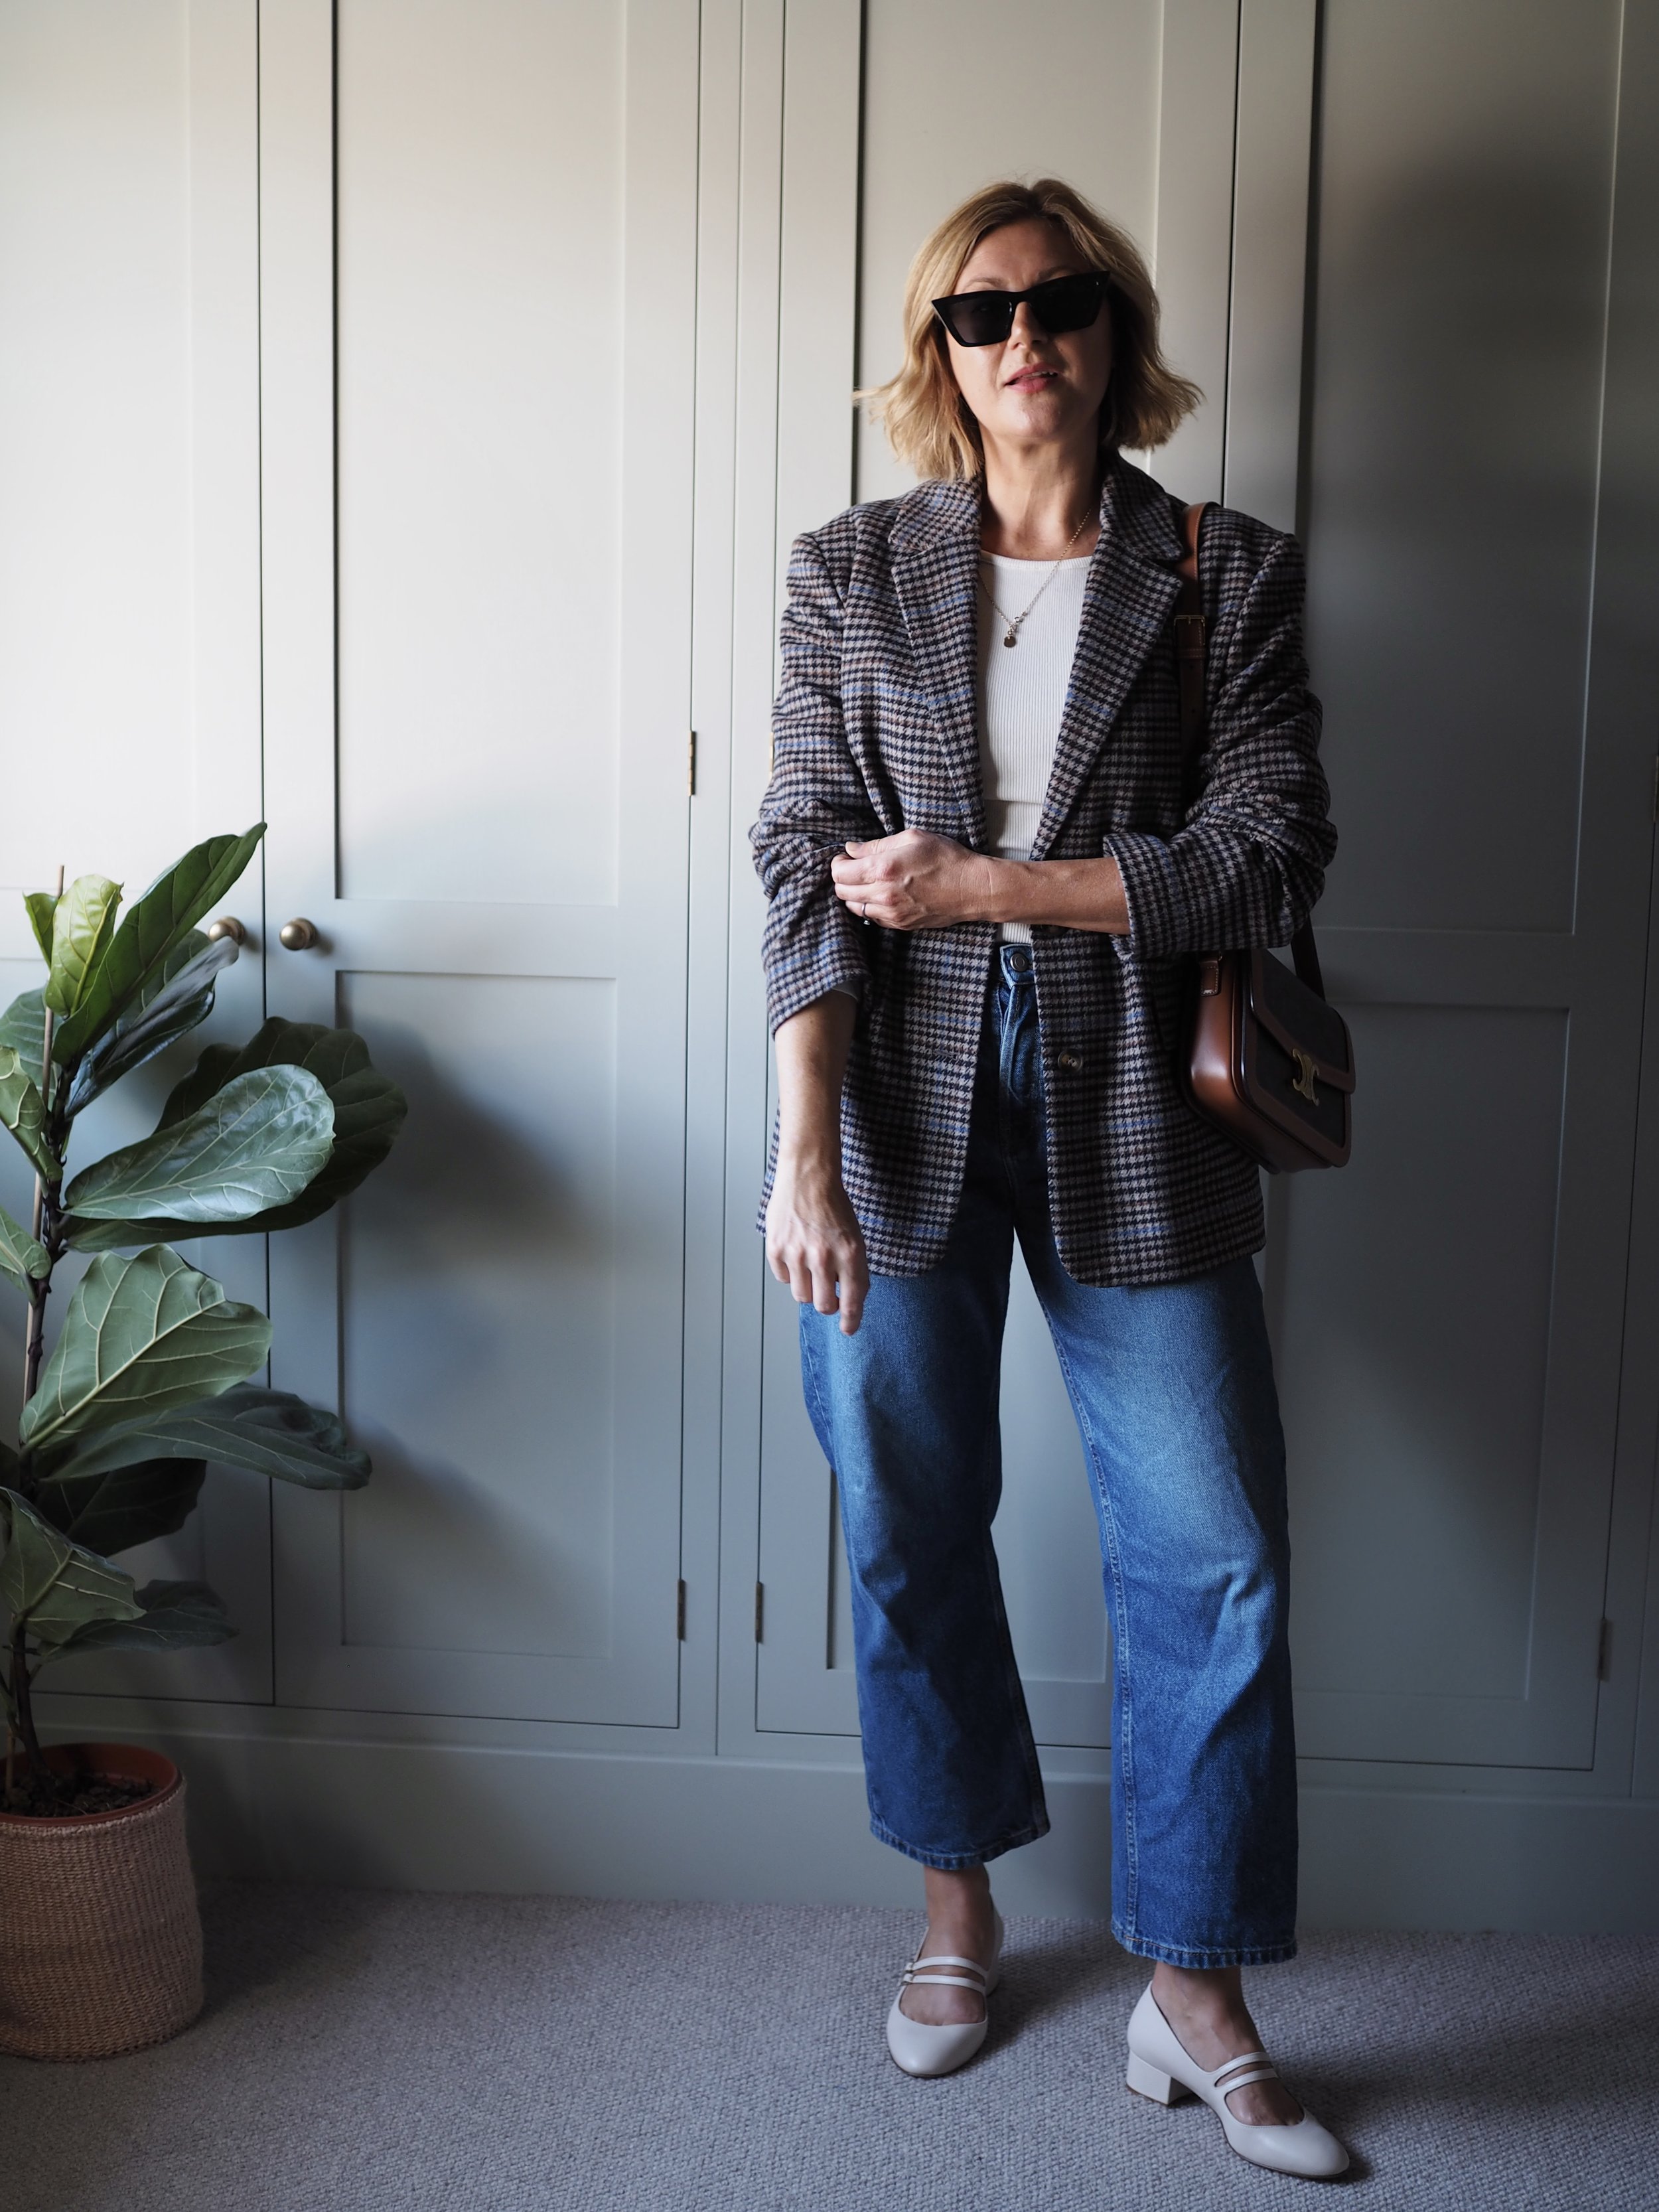 The Long Coat I'm Loving This Fall? A Wool Duster - The Mom Edit